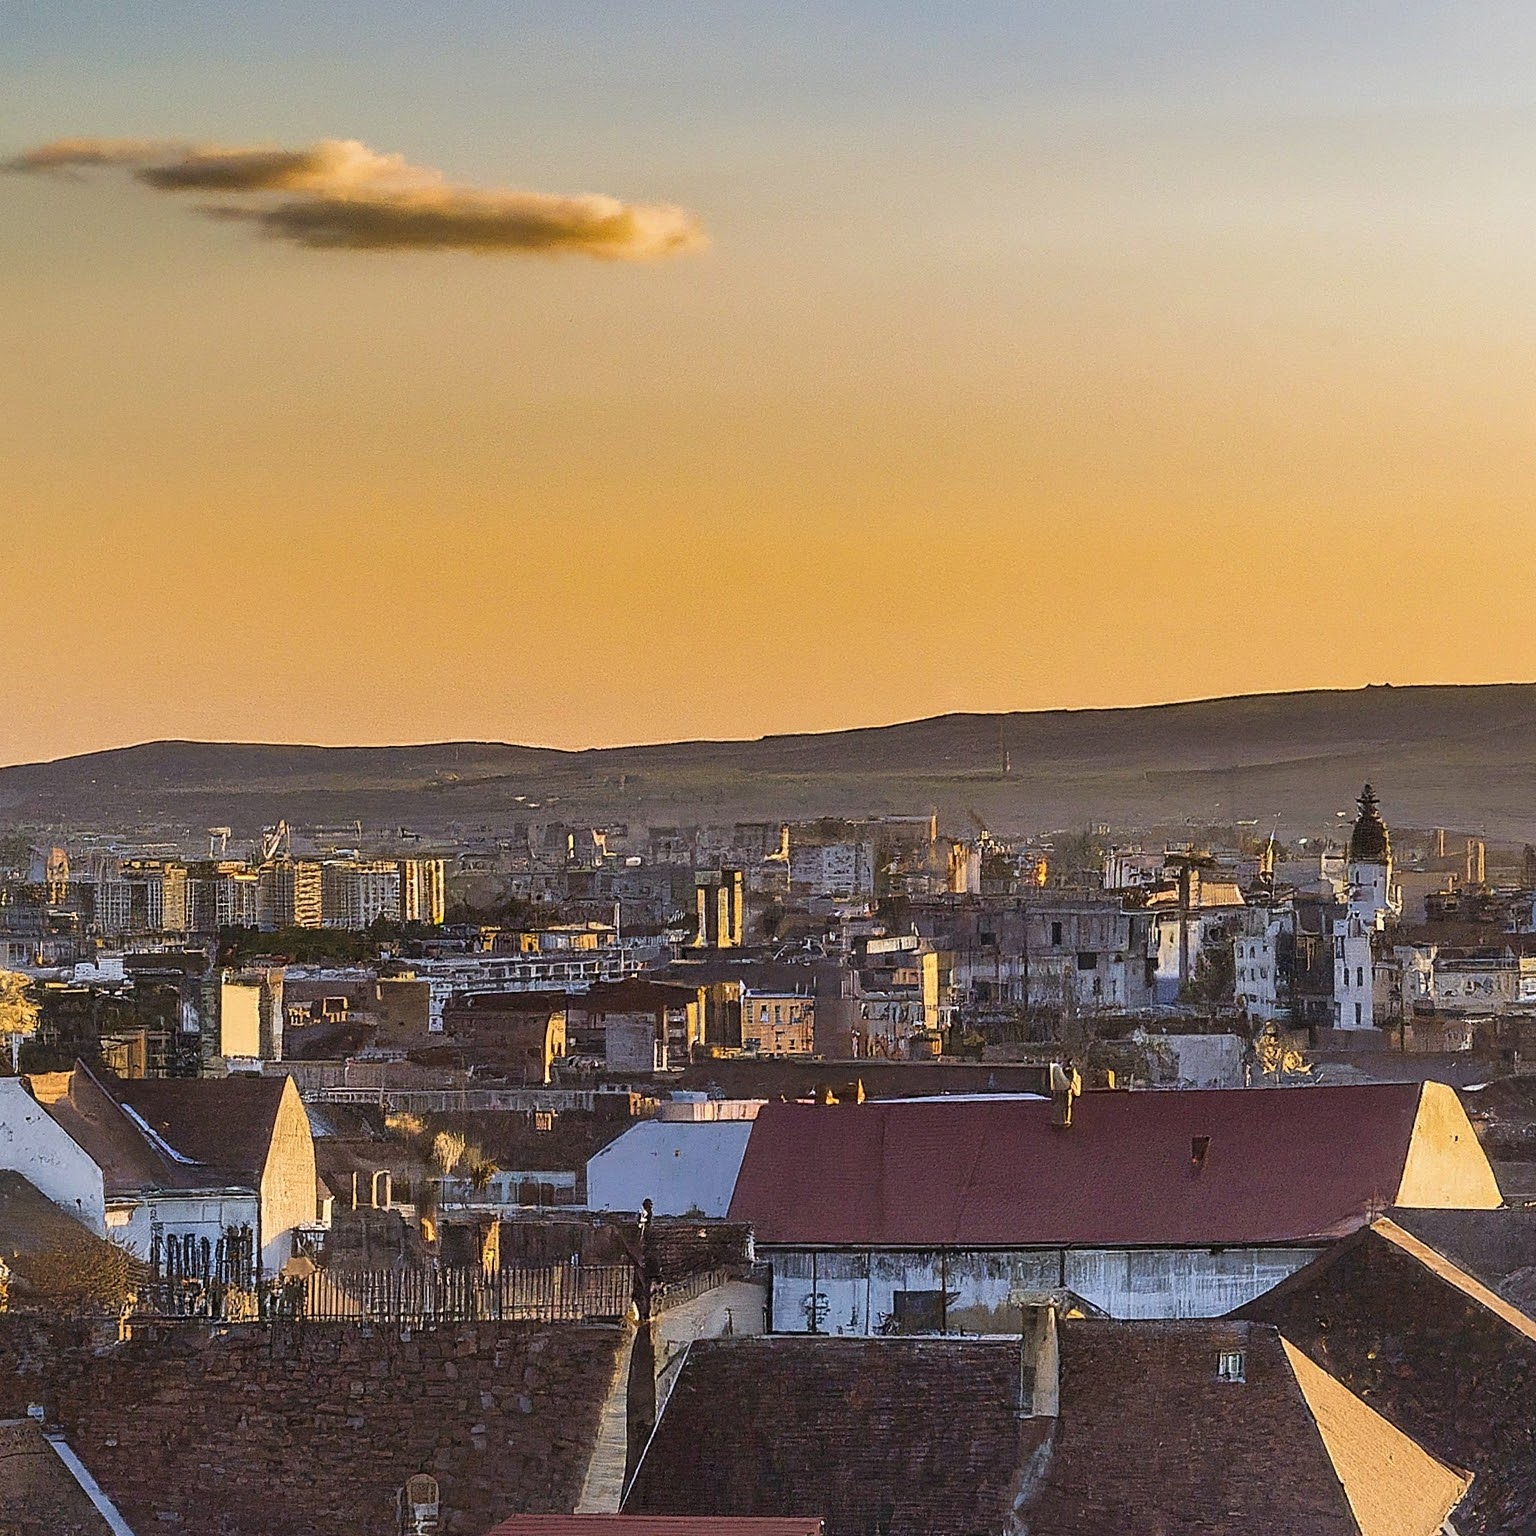 Panoramic view of Cluj-Napoca, Romania, at sunset with colorful rooftops and hills.